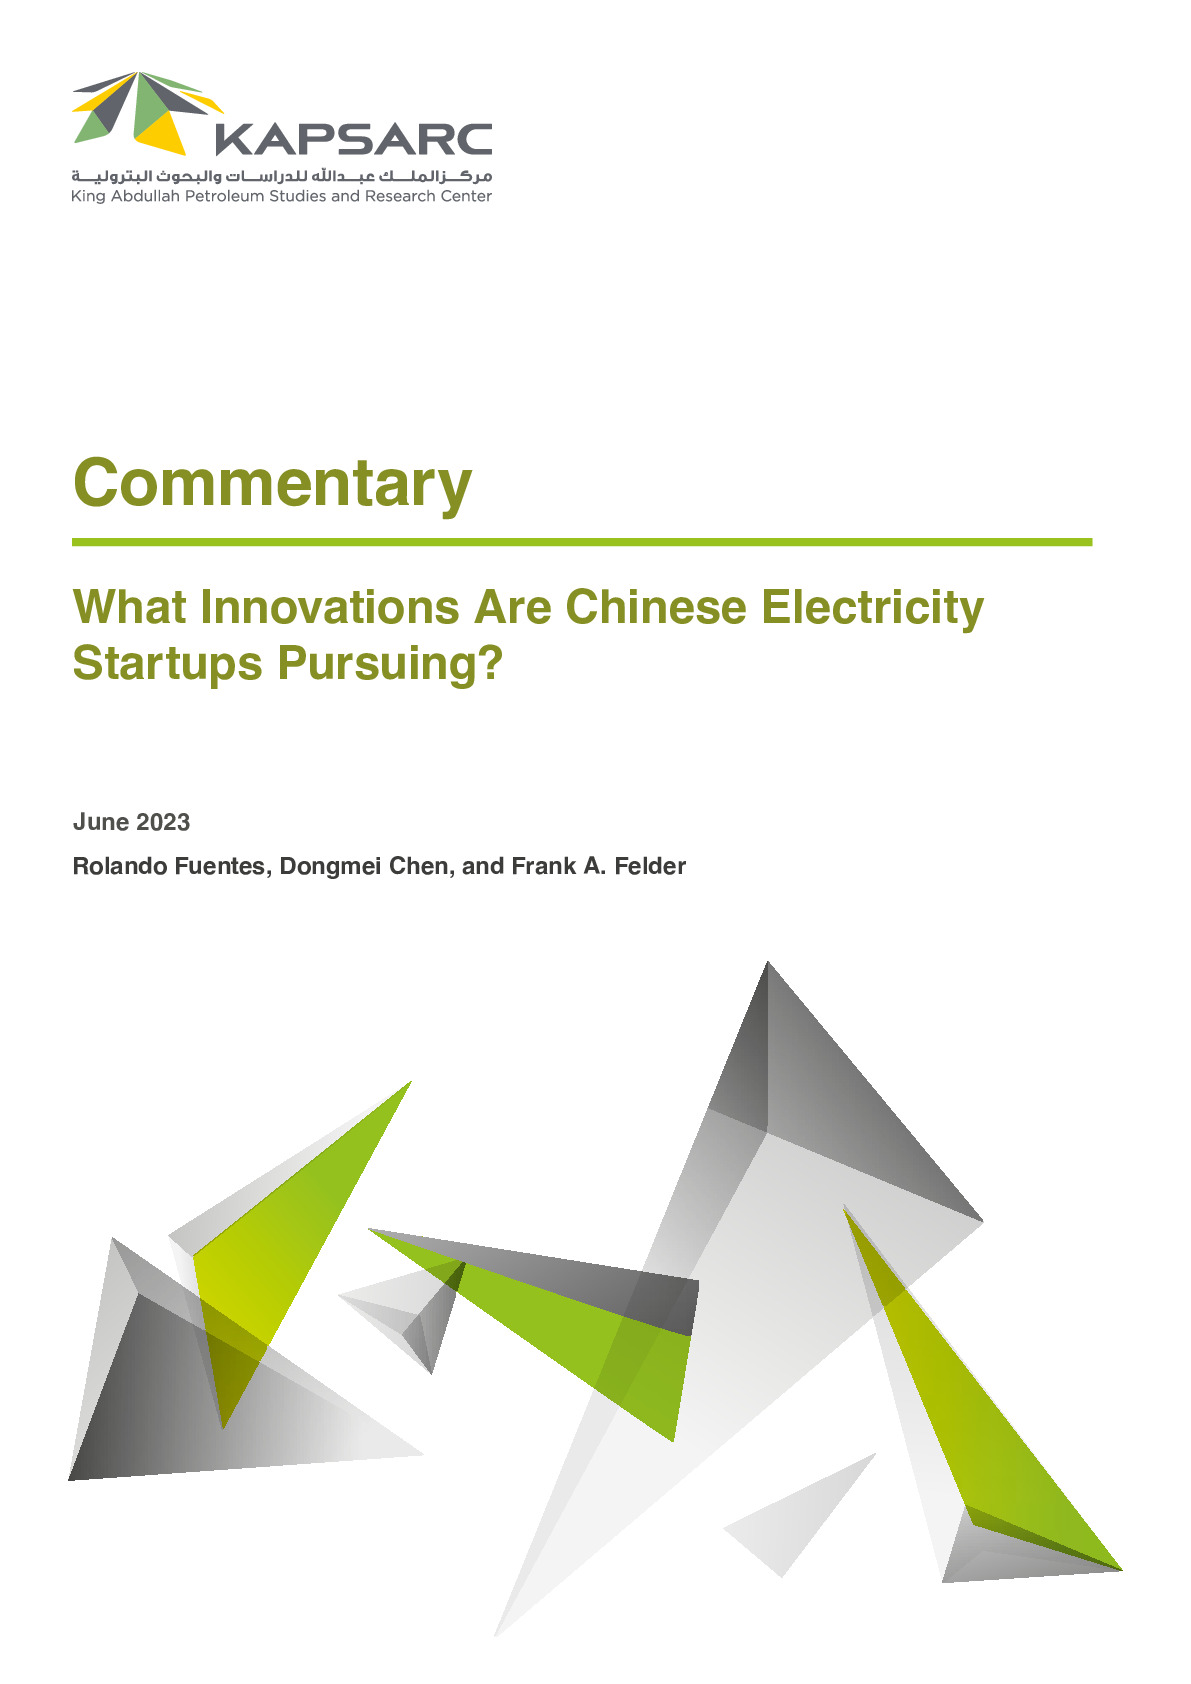 What Innovations Are Chinese Electricity Startups Pursuing?